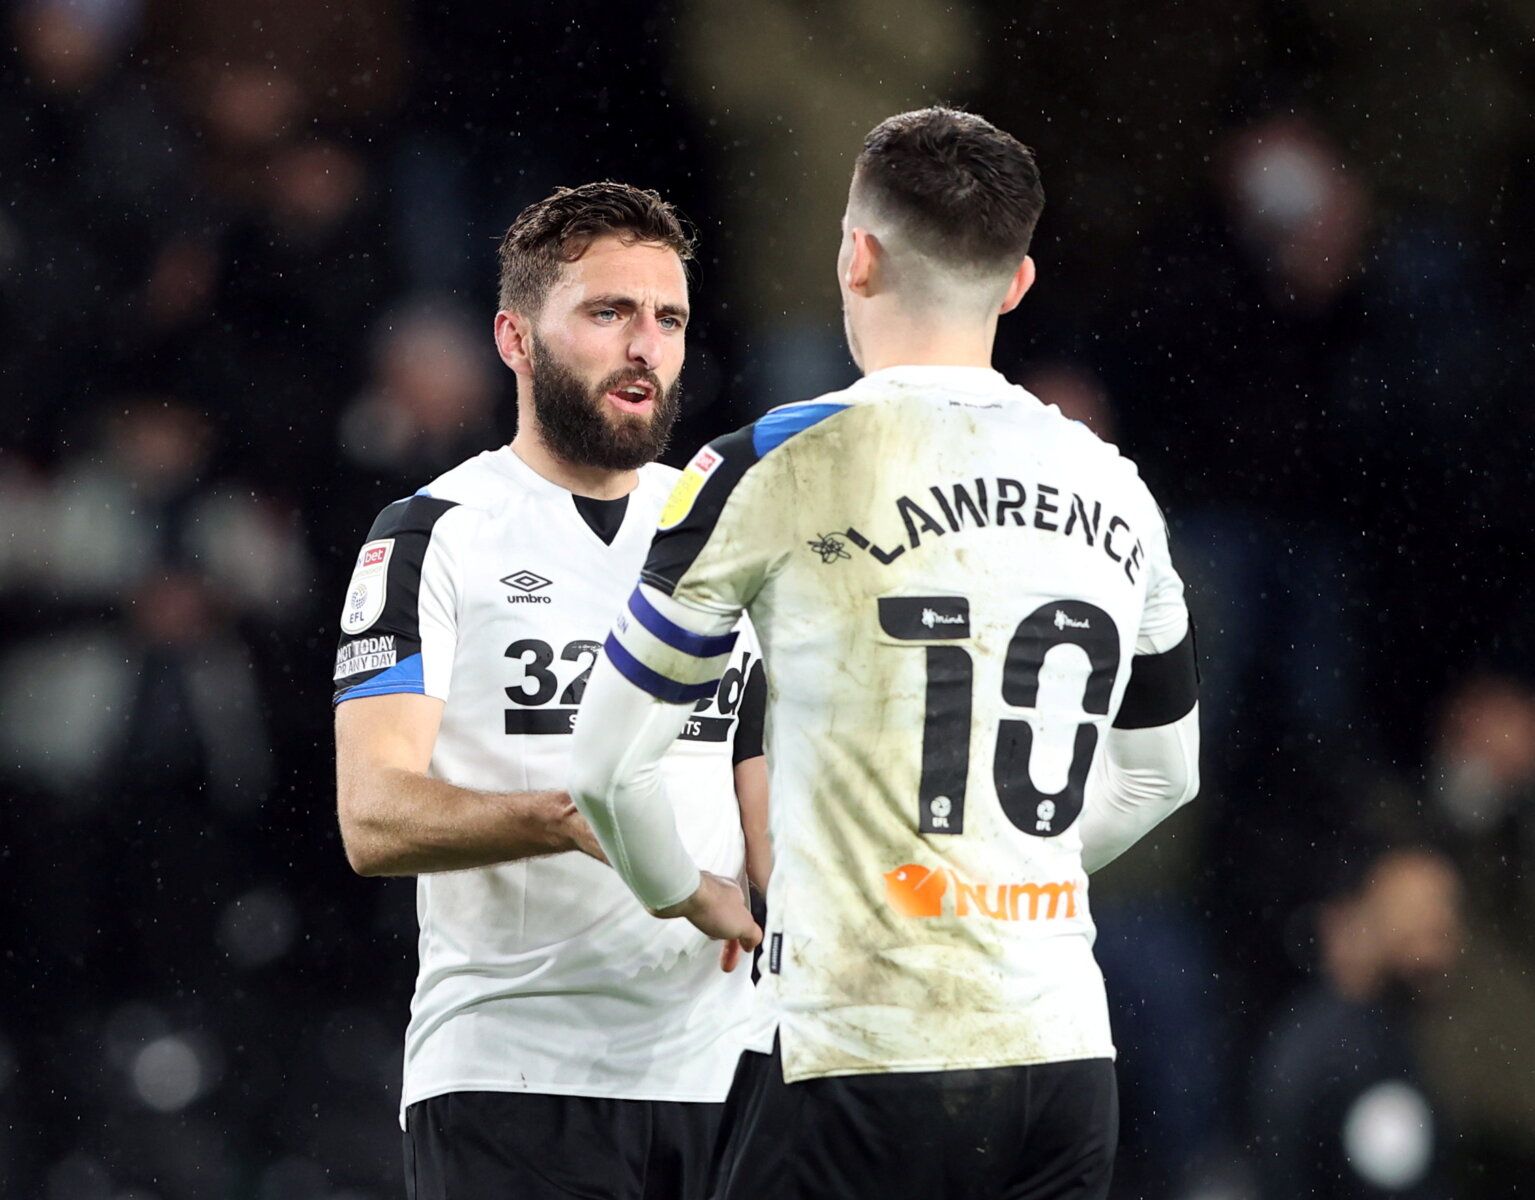 Soccer Football - Championship - Derby County v Blackpool - Pride Park, Derby, Britain - December 11, 2021  Derby County's Graeme Shinnie and Tom Lawrence celebrate after Luke Plange scores their first goal  Action Images/Molly Darlington  EDITORIAL USE ONLY. No use with unauthorized audio, video, data, fixture lists, club/league logos or 